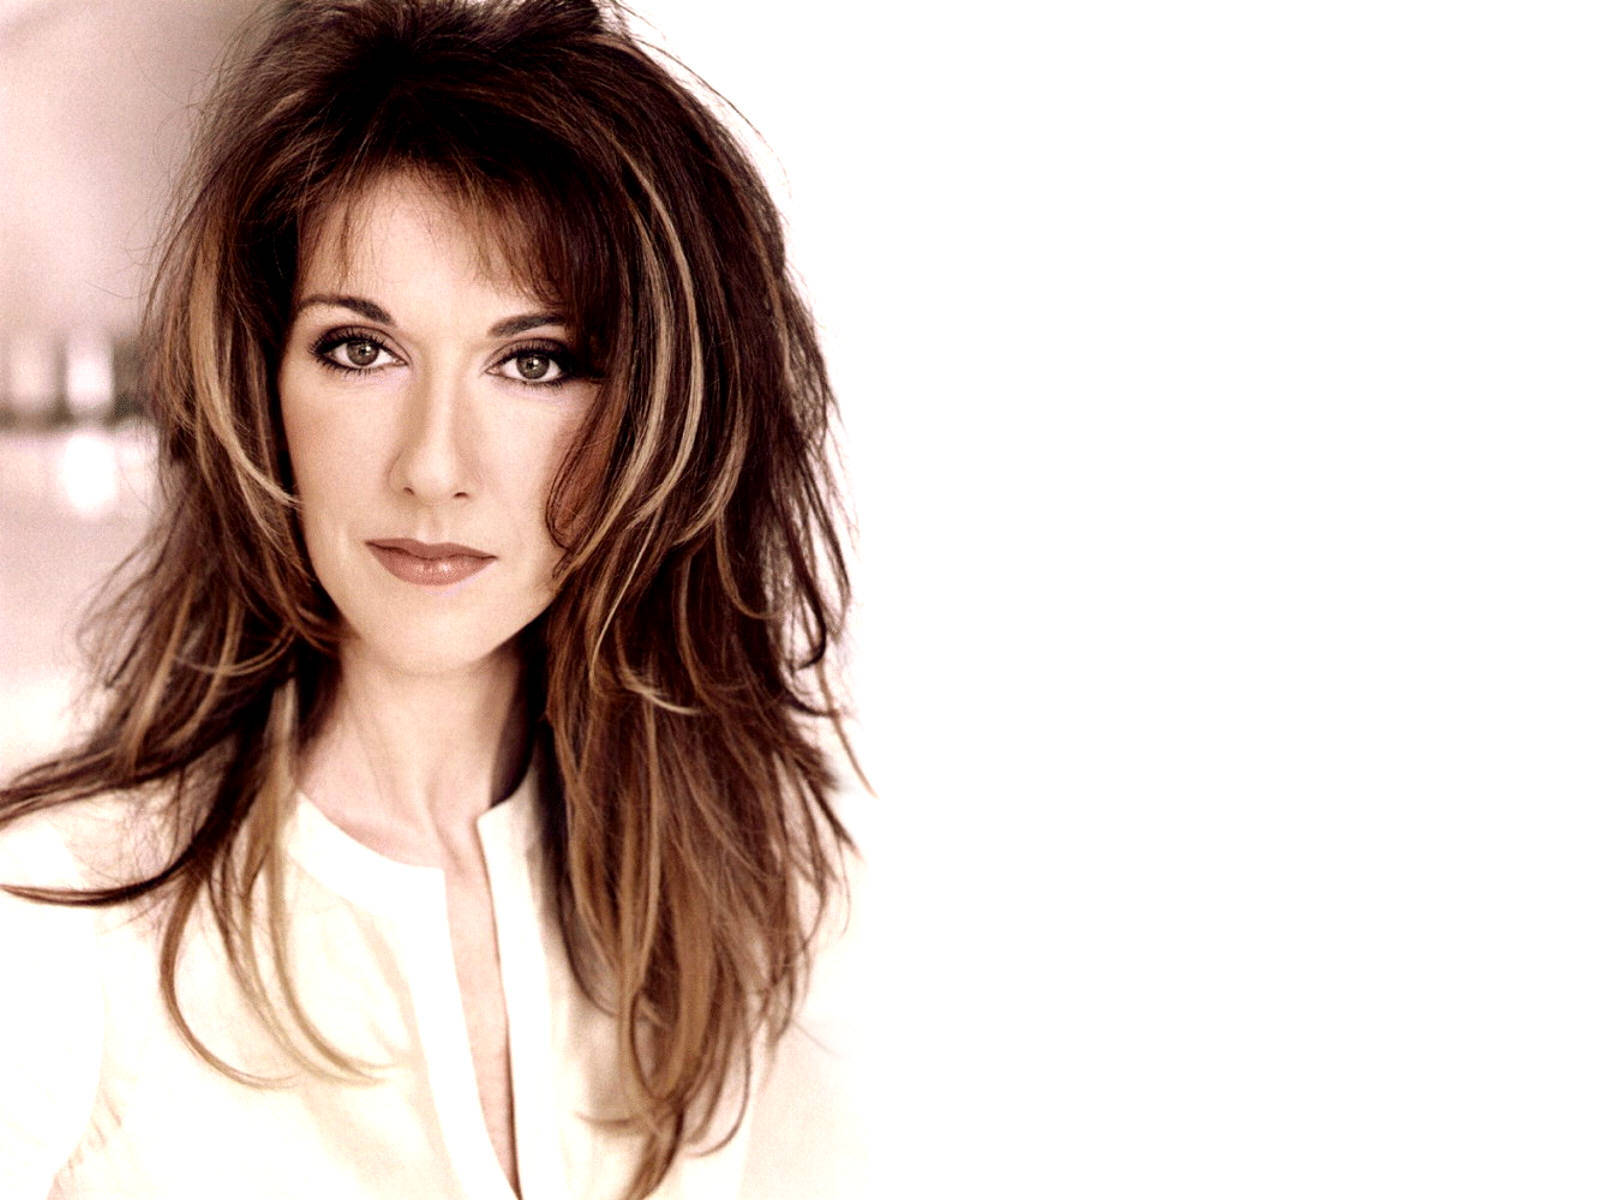 Beautiful Celine Dion On White